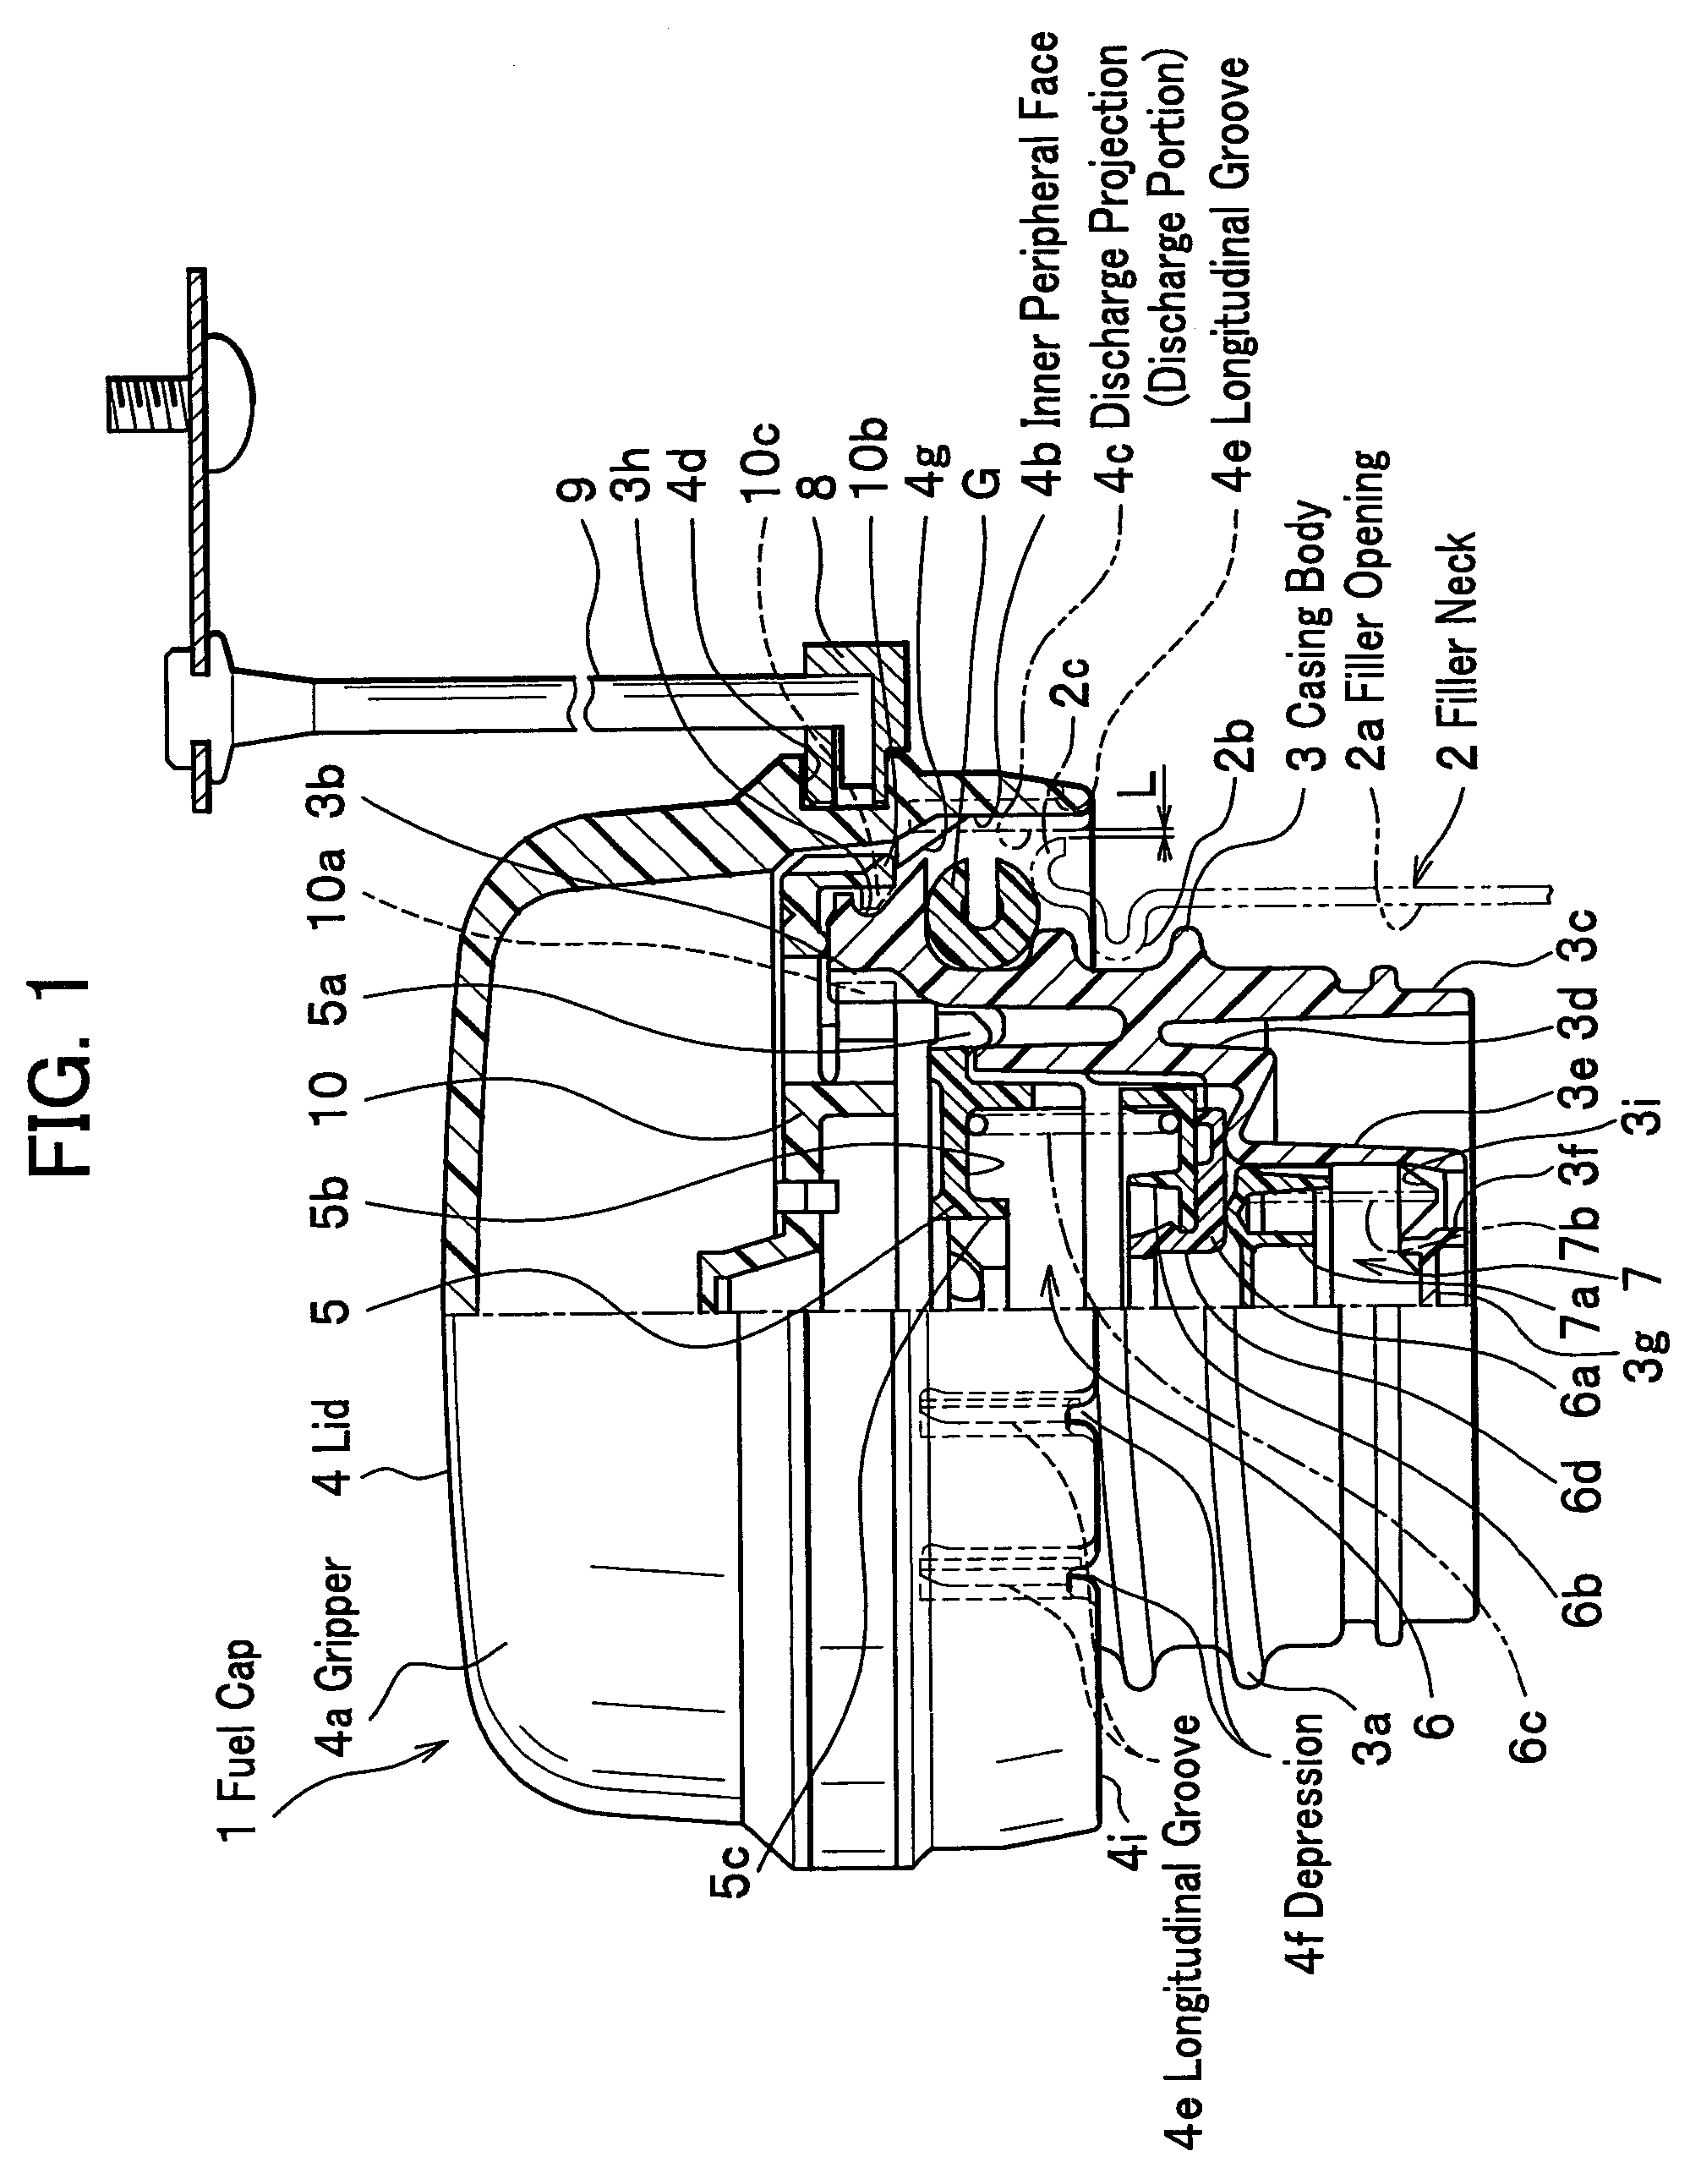 Vehicle fuel cap with axial longitudinal grooves in casing body